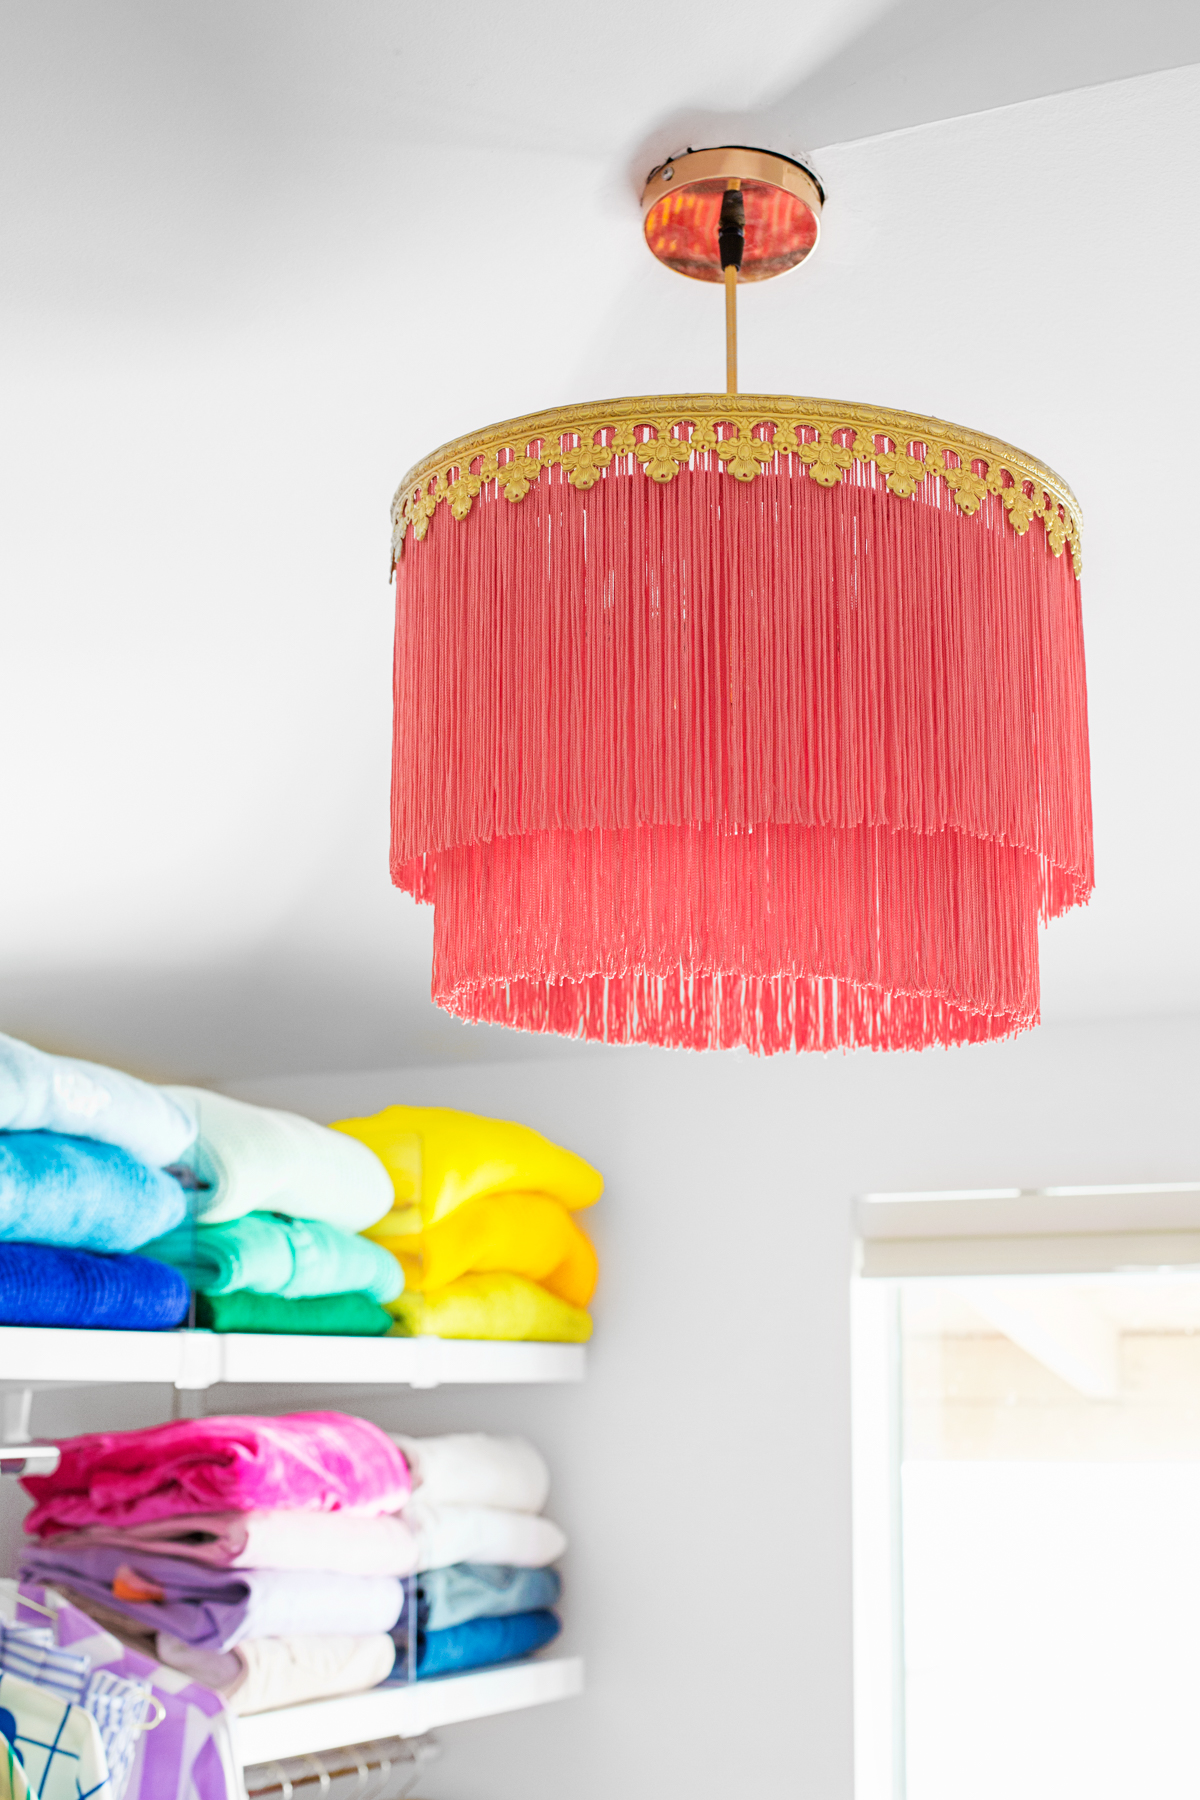 How To Make A Fringe Chandelier, How To Put Fringe On A Lampshade